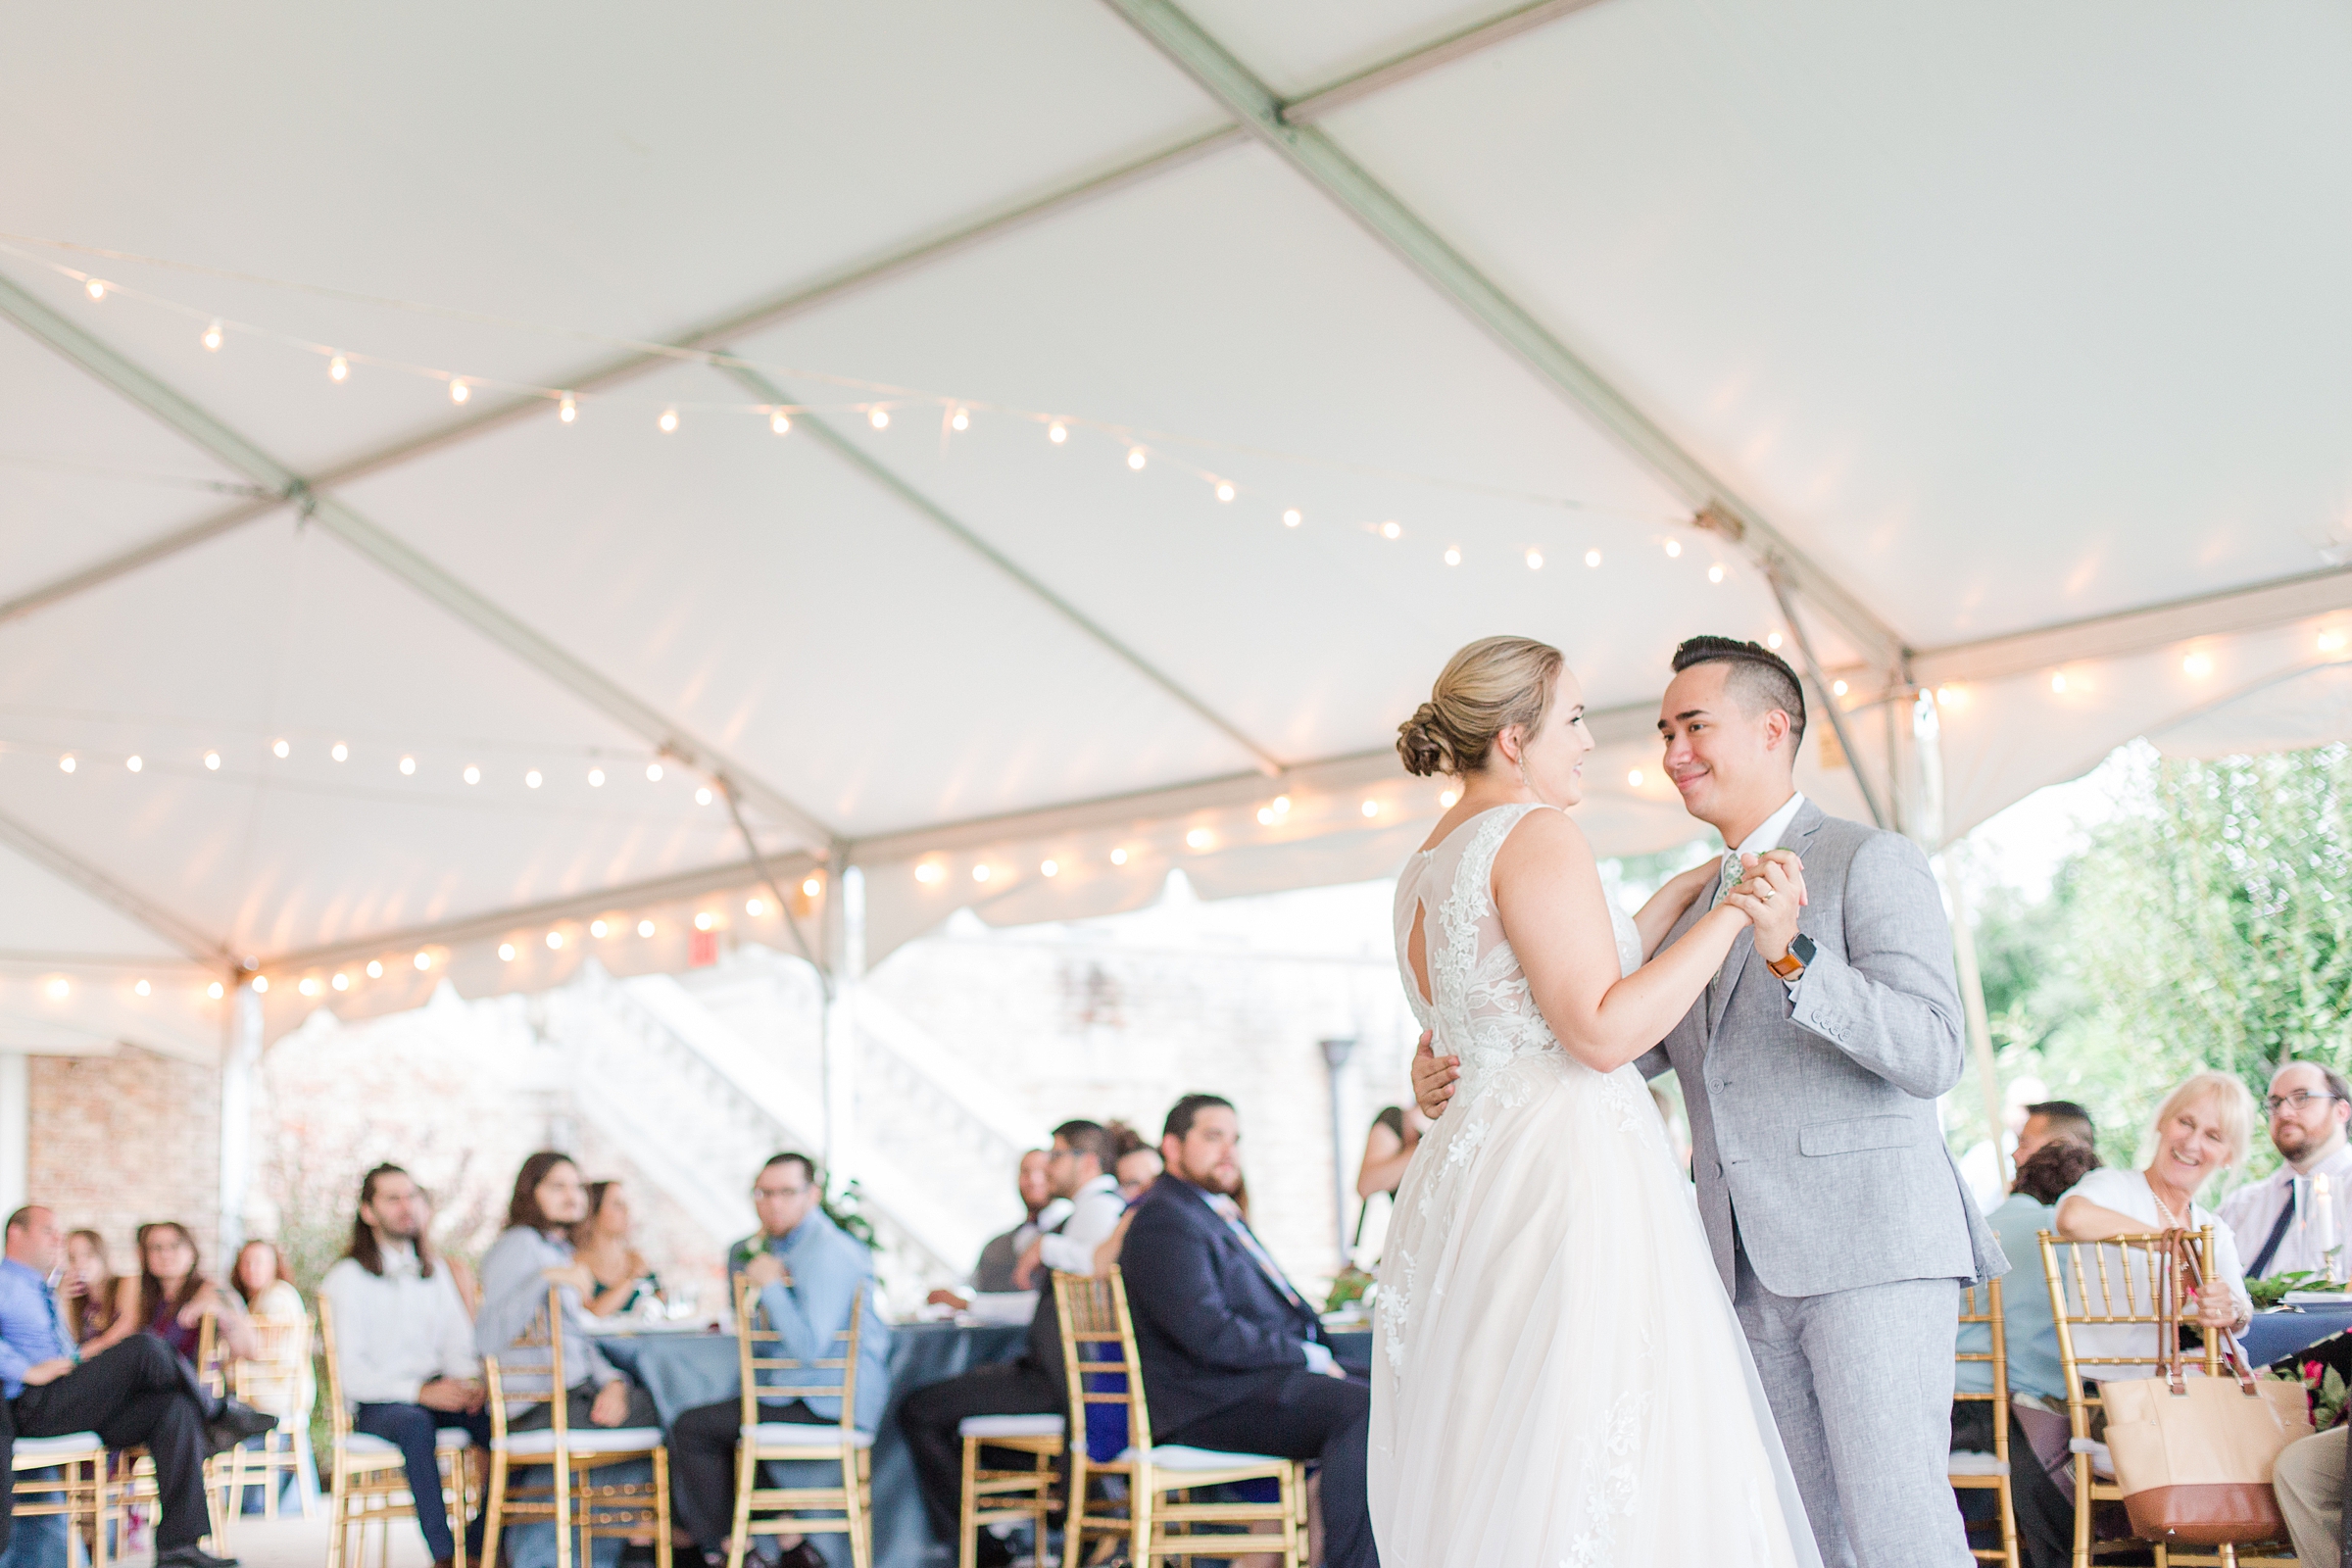 Grace Estate Winery reception by Virginia Wedding Photographer Kailey Brianne Photography